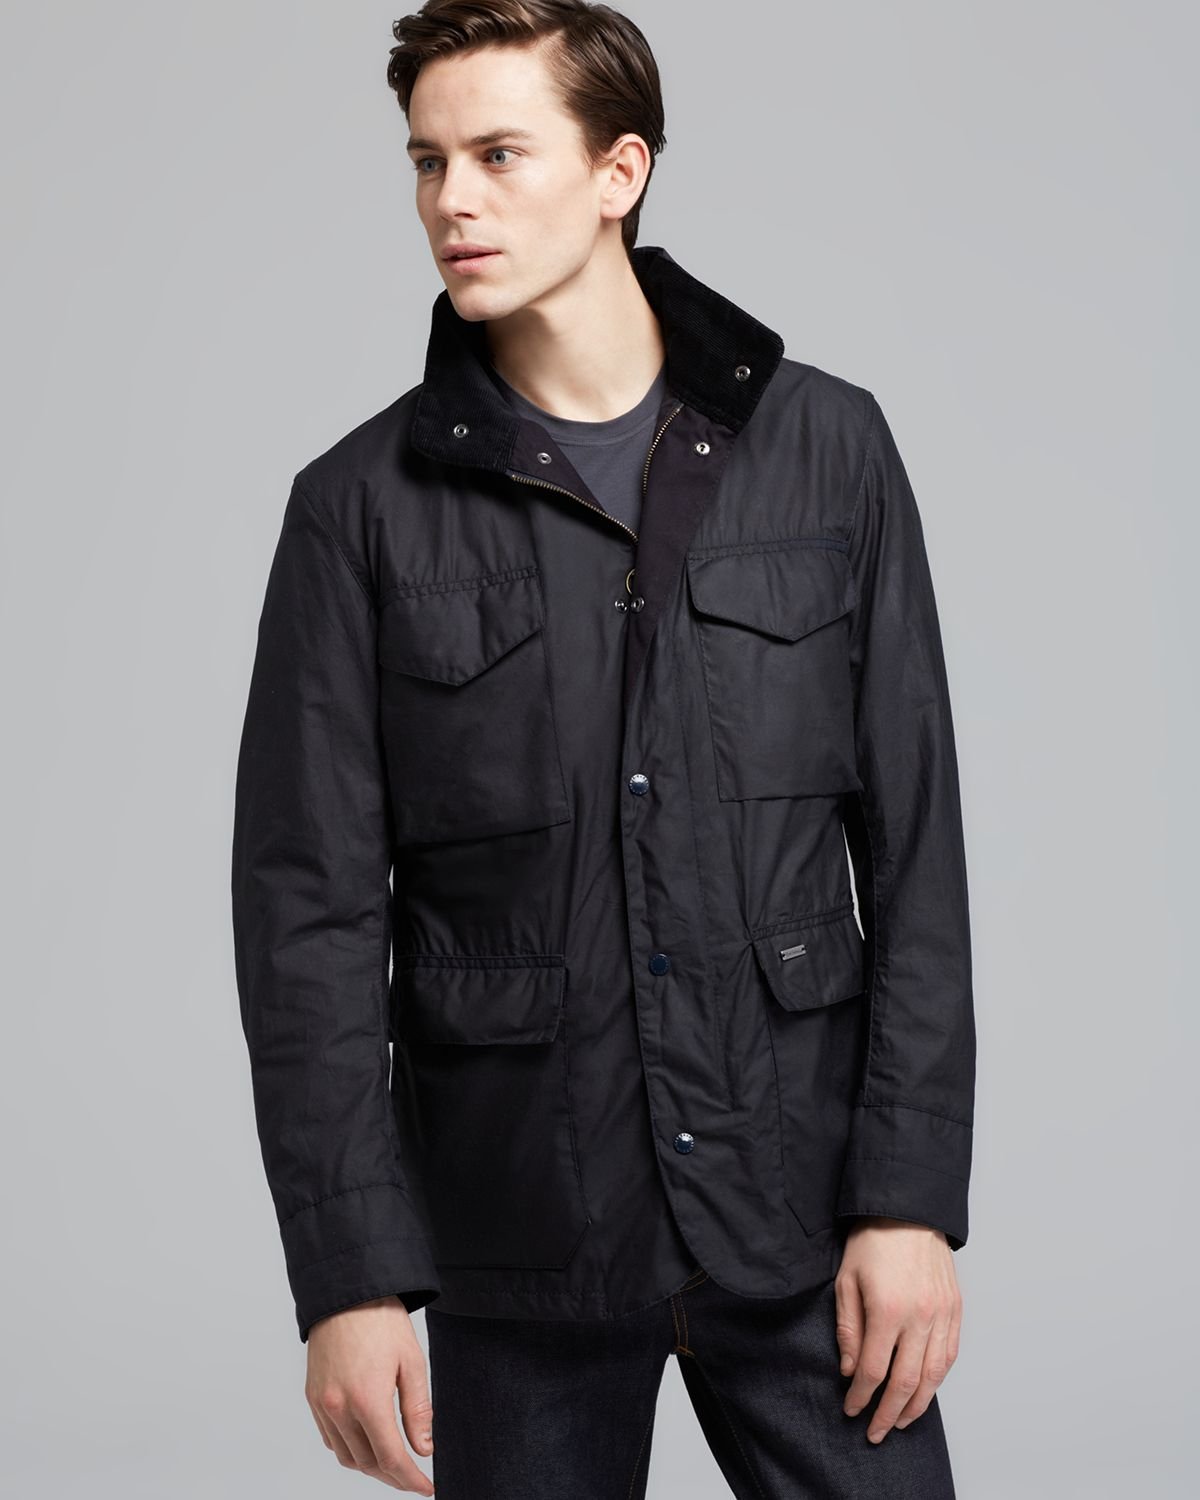 Barbour Tailored Sapper Jacket in Navy (Blue) for Men - Lyst